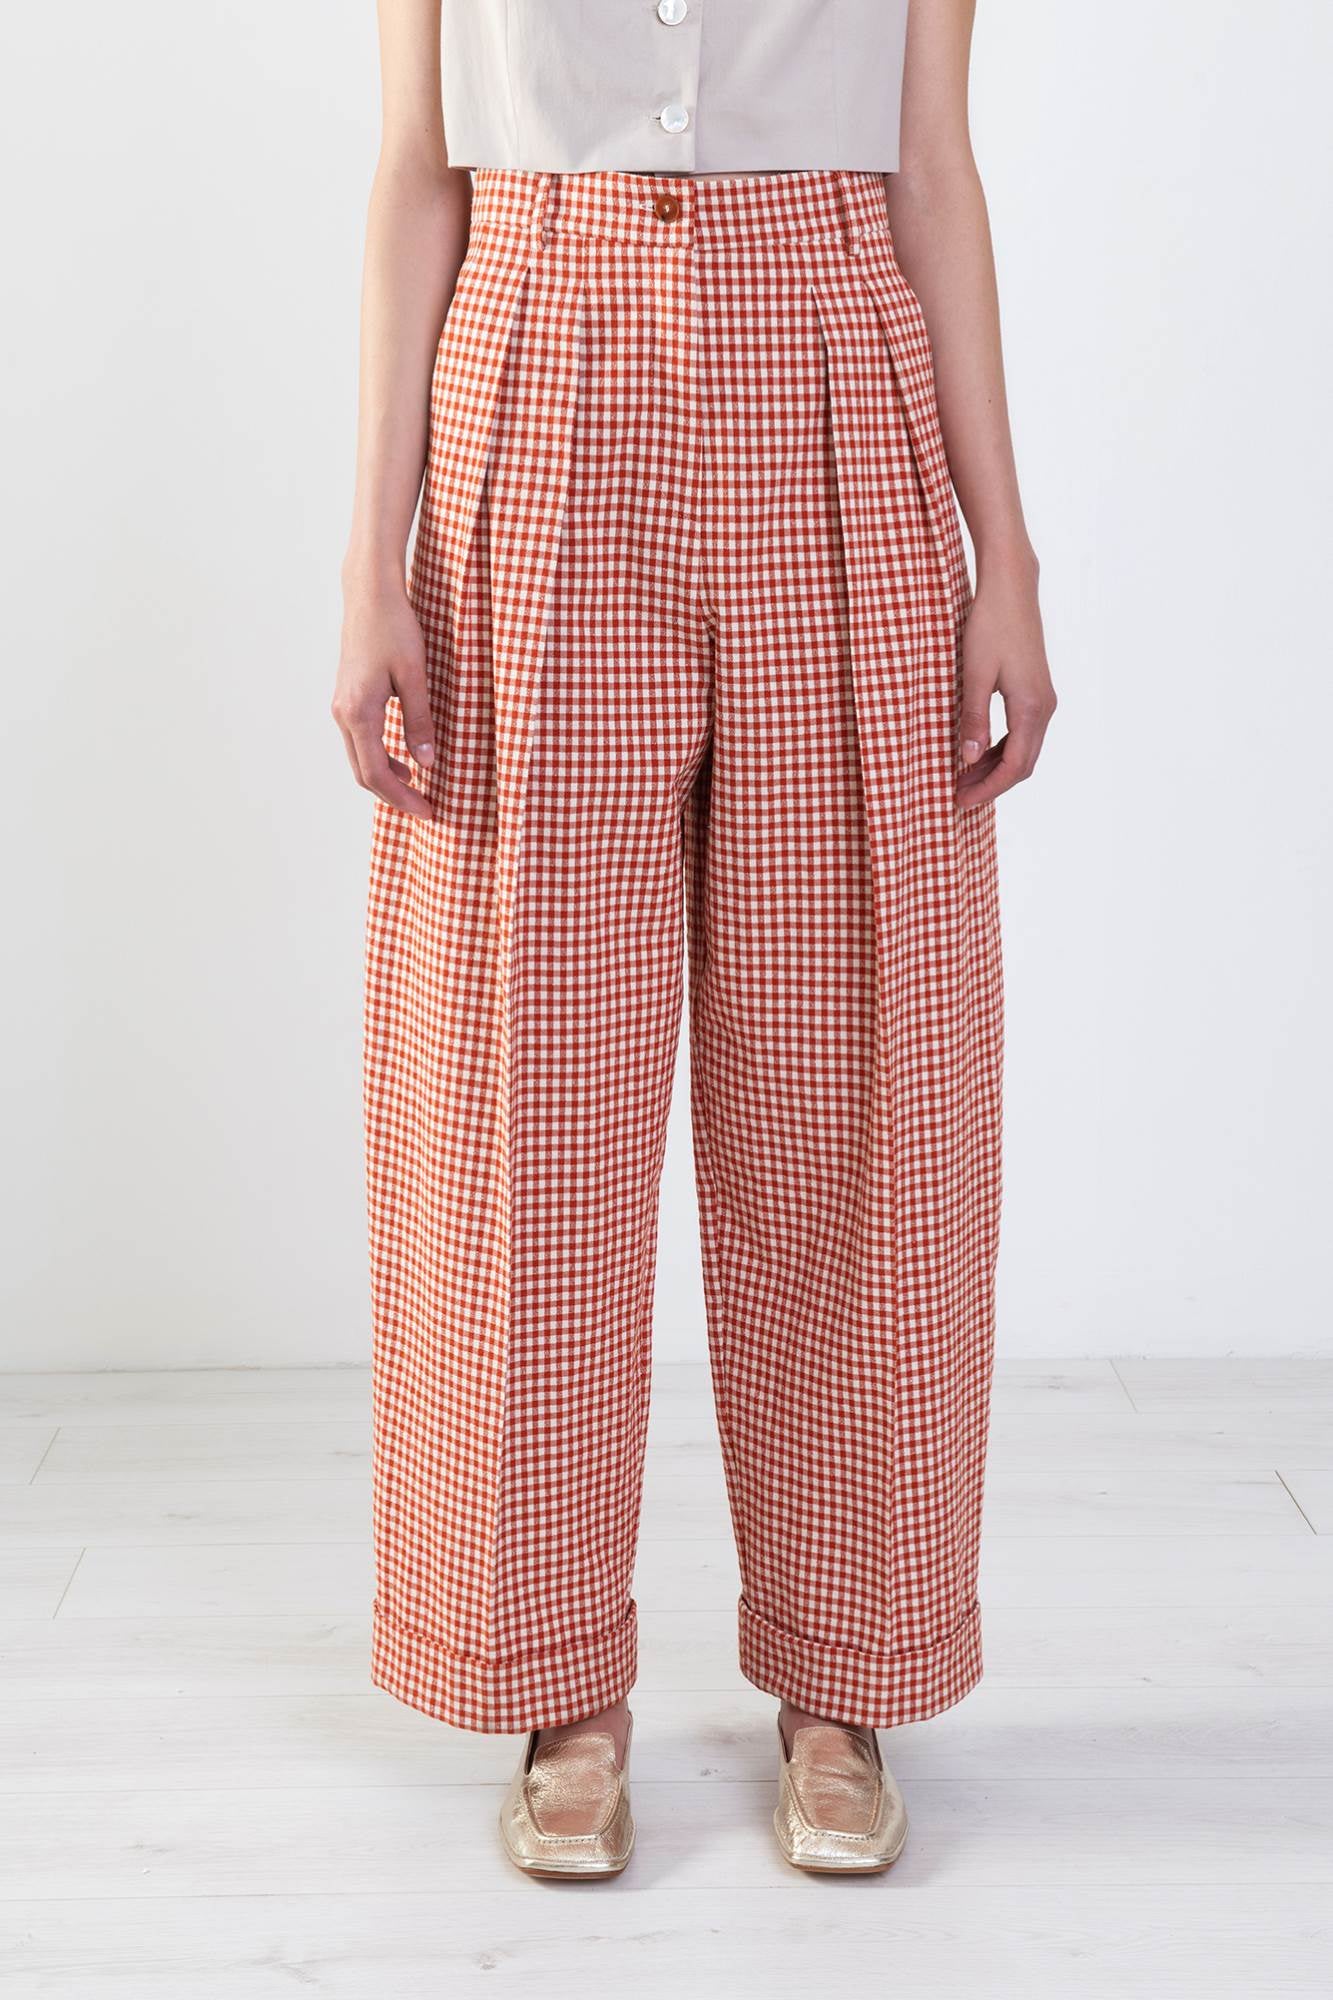 MICRO VICHY TROUSERS WITH TURN UP